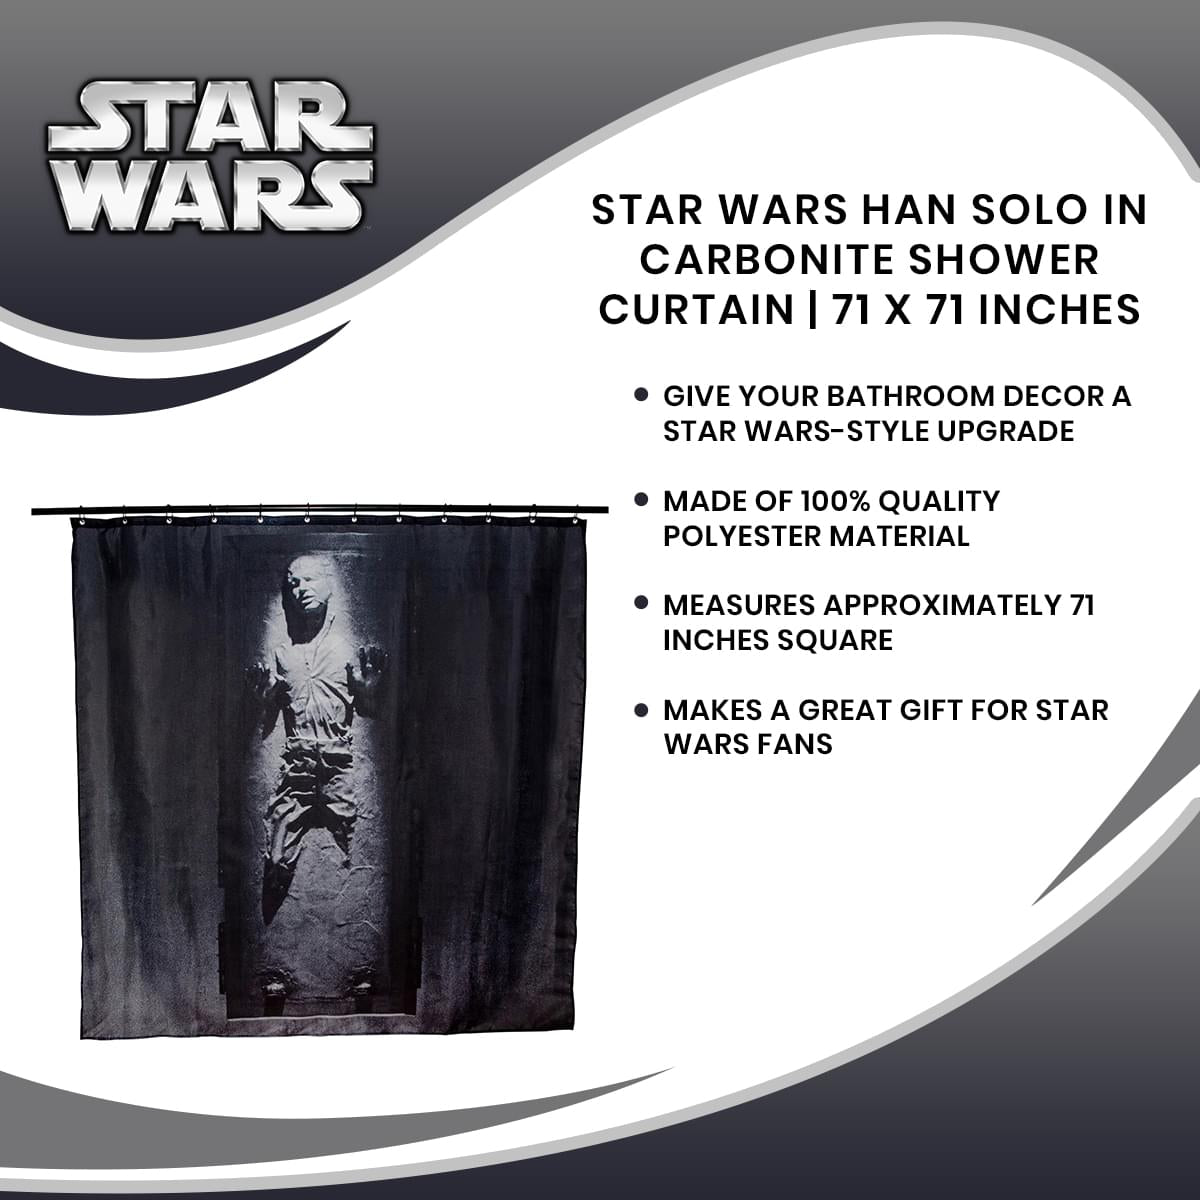 Star Wars Han Solo In Carbonite Shower Curtain | 71 x 71 Inches